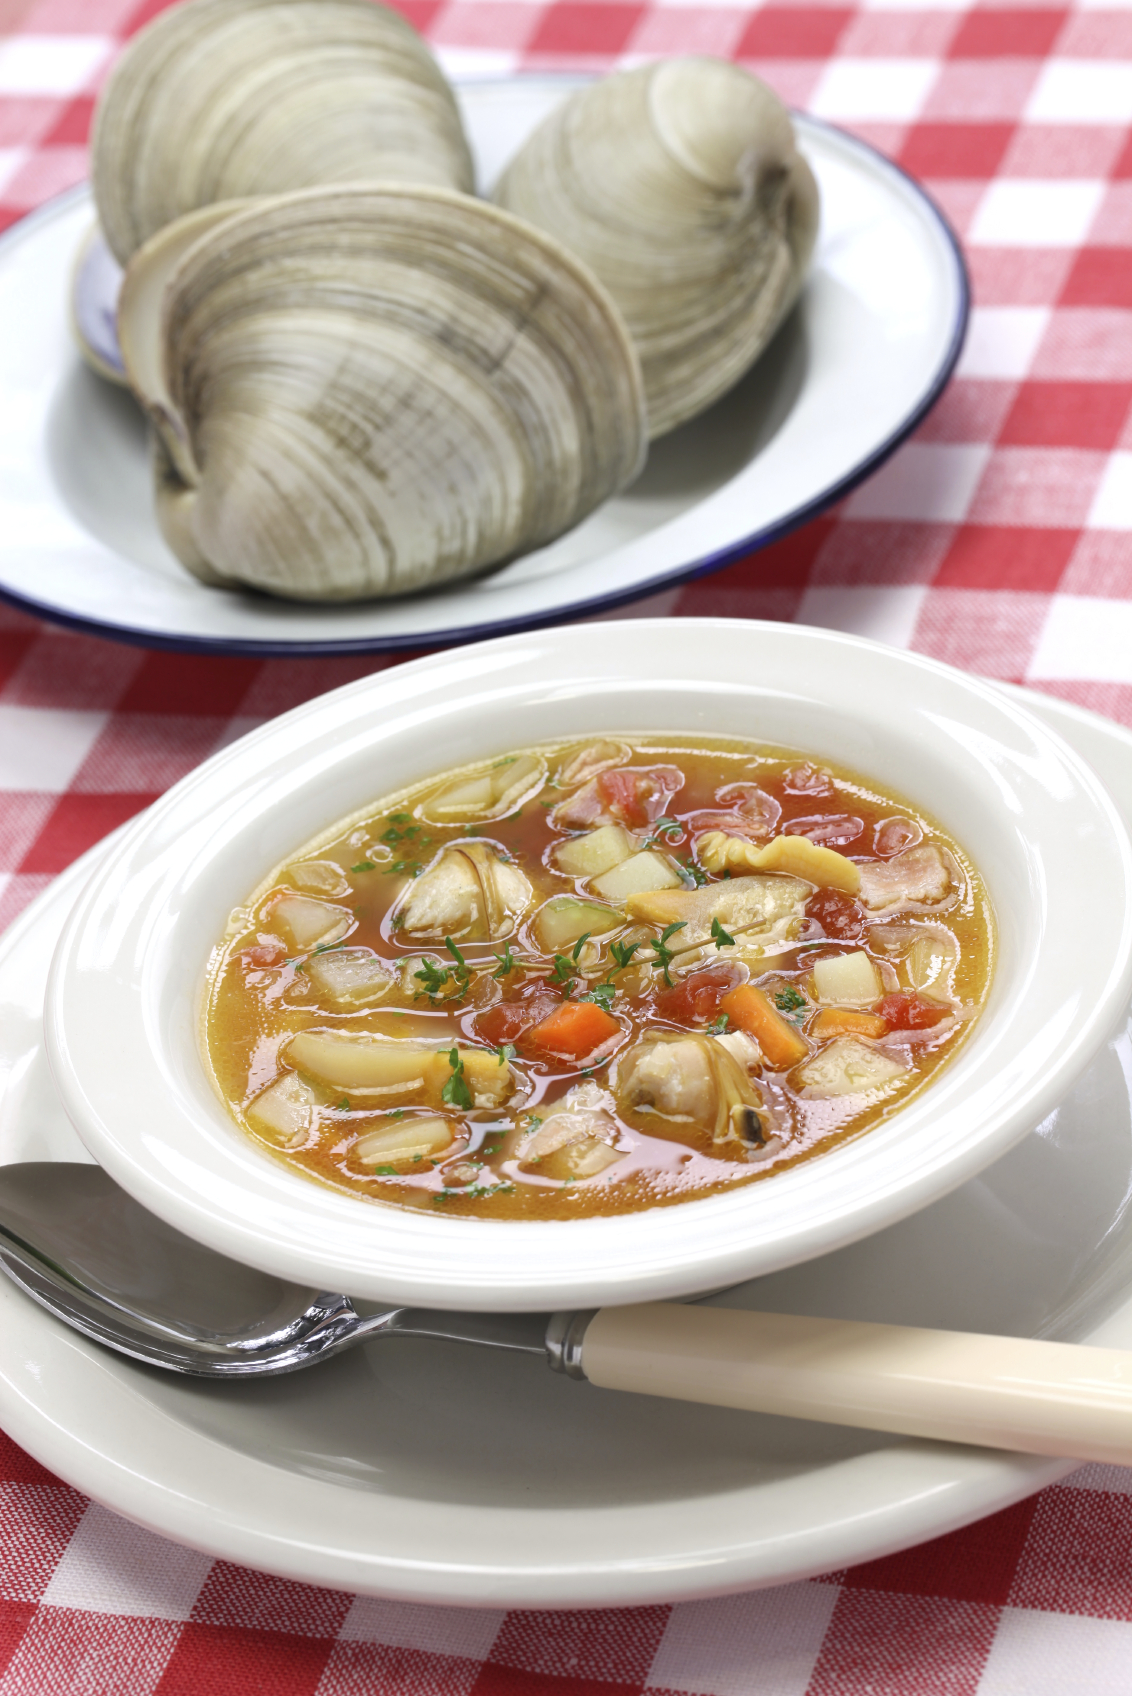 Manhattan clam chowder includes tomatoes. (iStock)